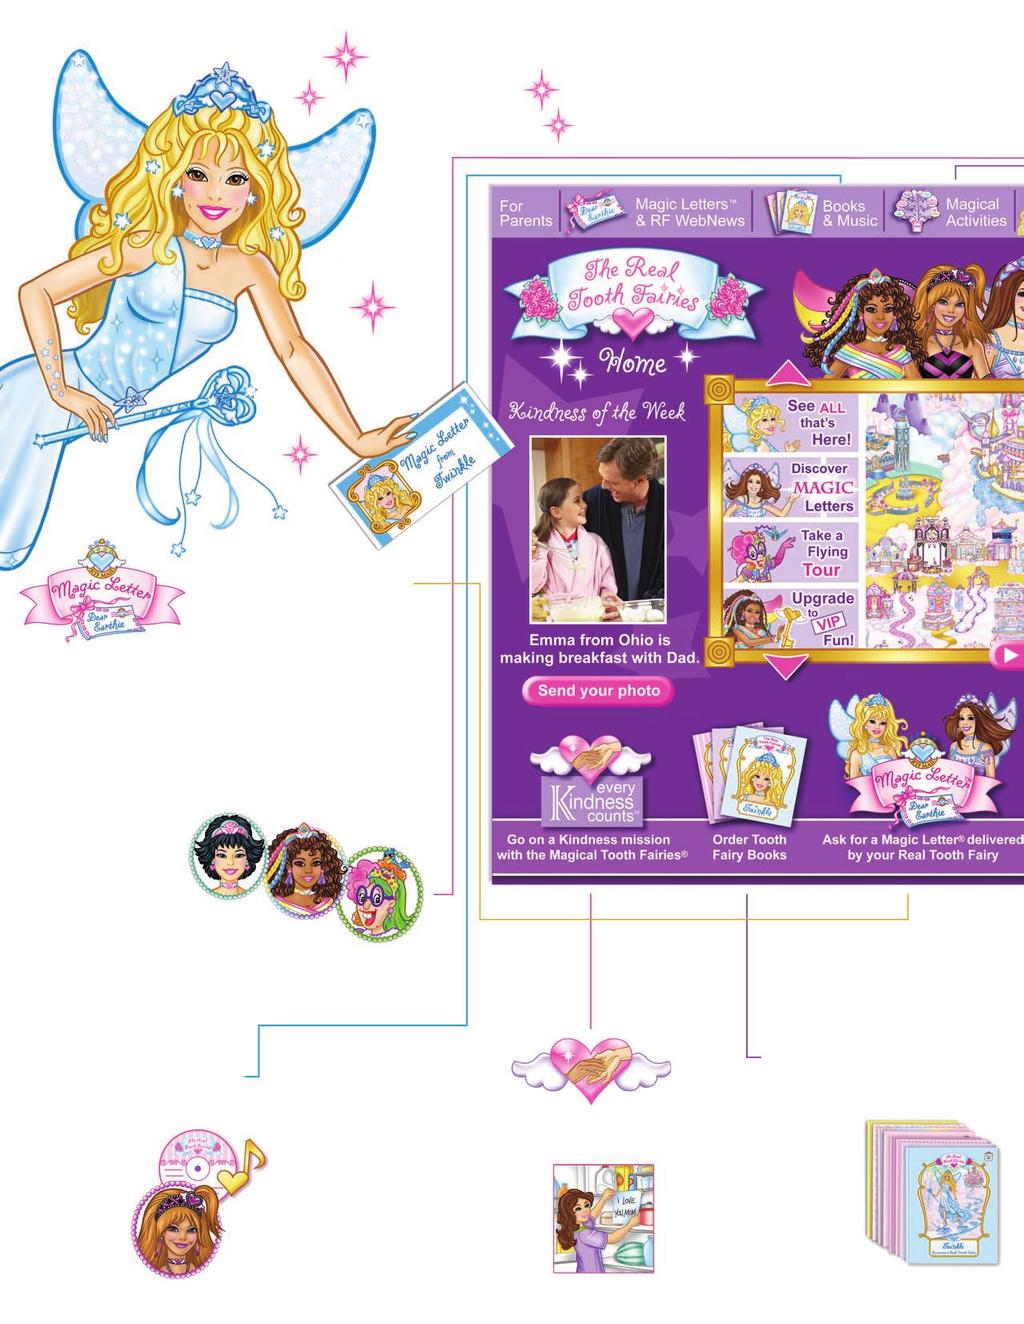 See the Magical World o Ask for a Tooth Fairy Letter! Here s where your girl can Magic Message her Real Tooth Fairy and request personalized Magic Letters from her for pillow delivery!